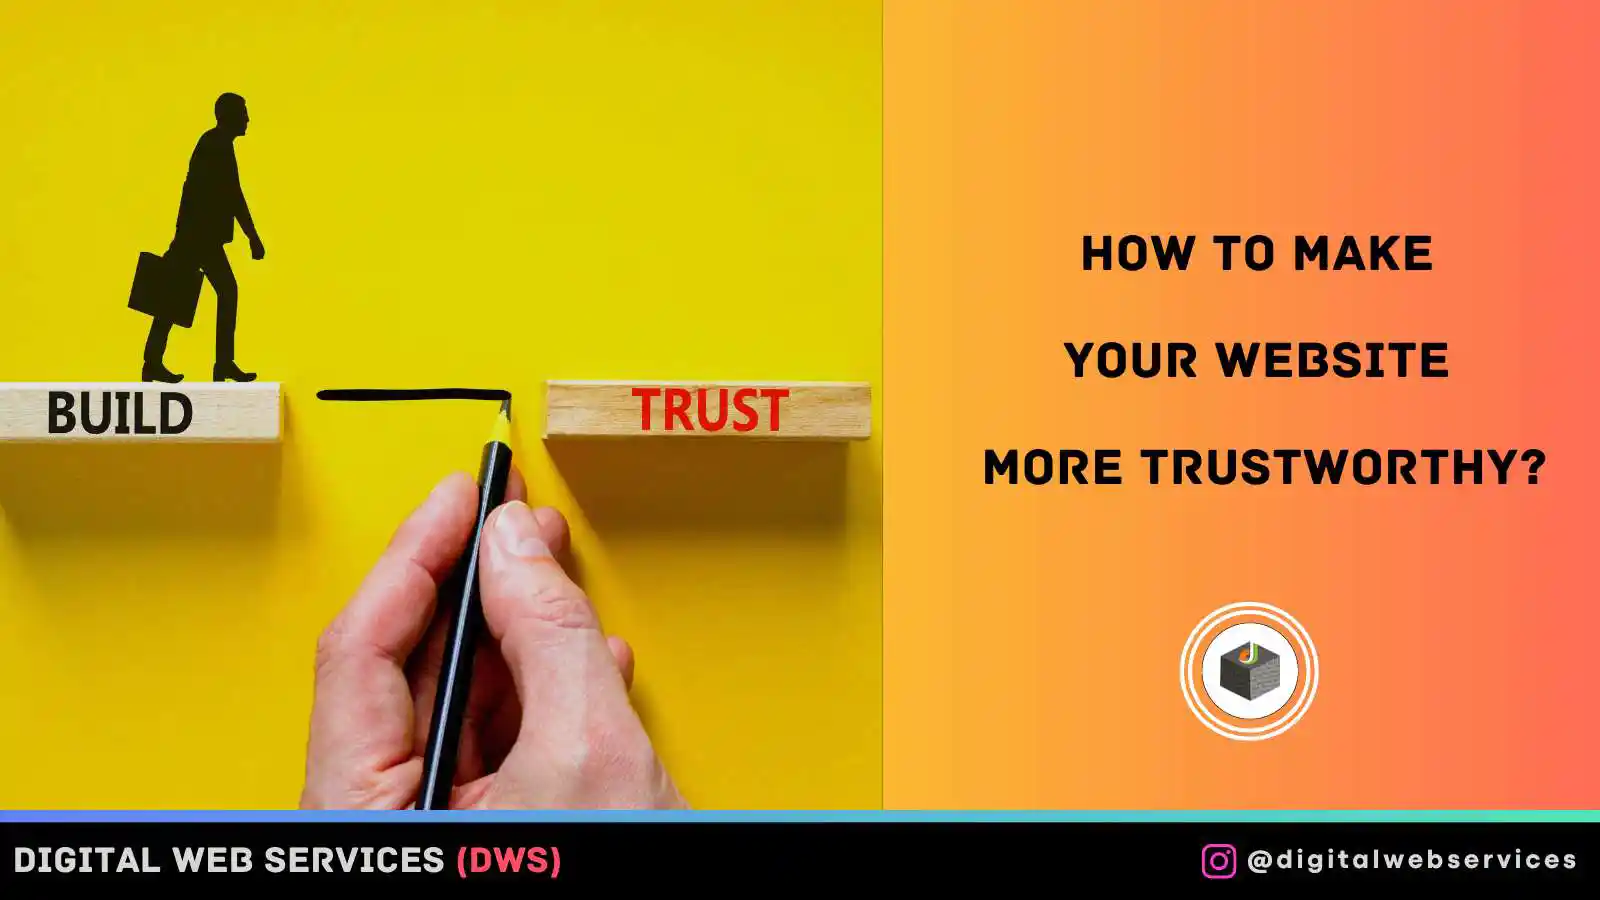 How To Make Your Website More Trustworthy